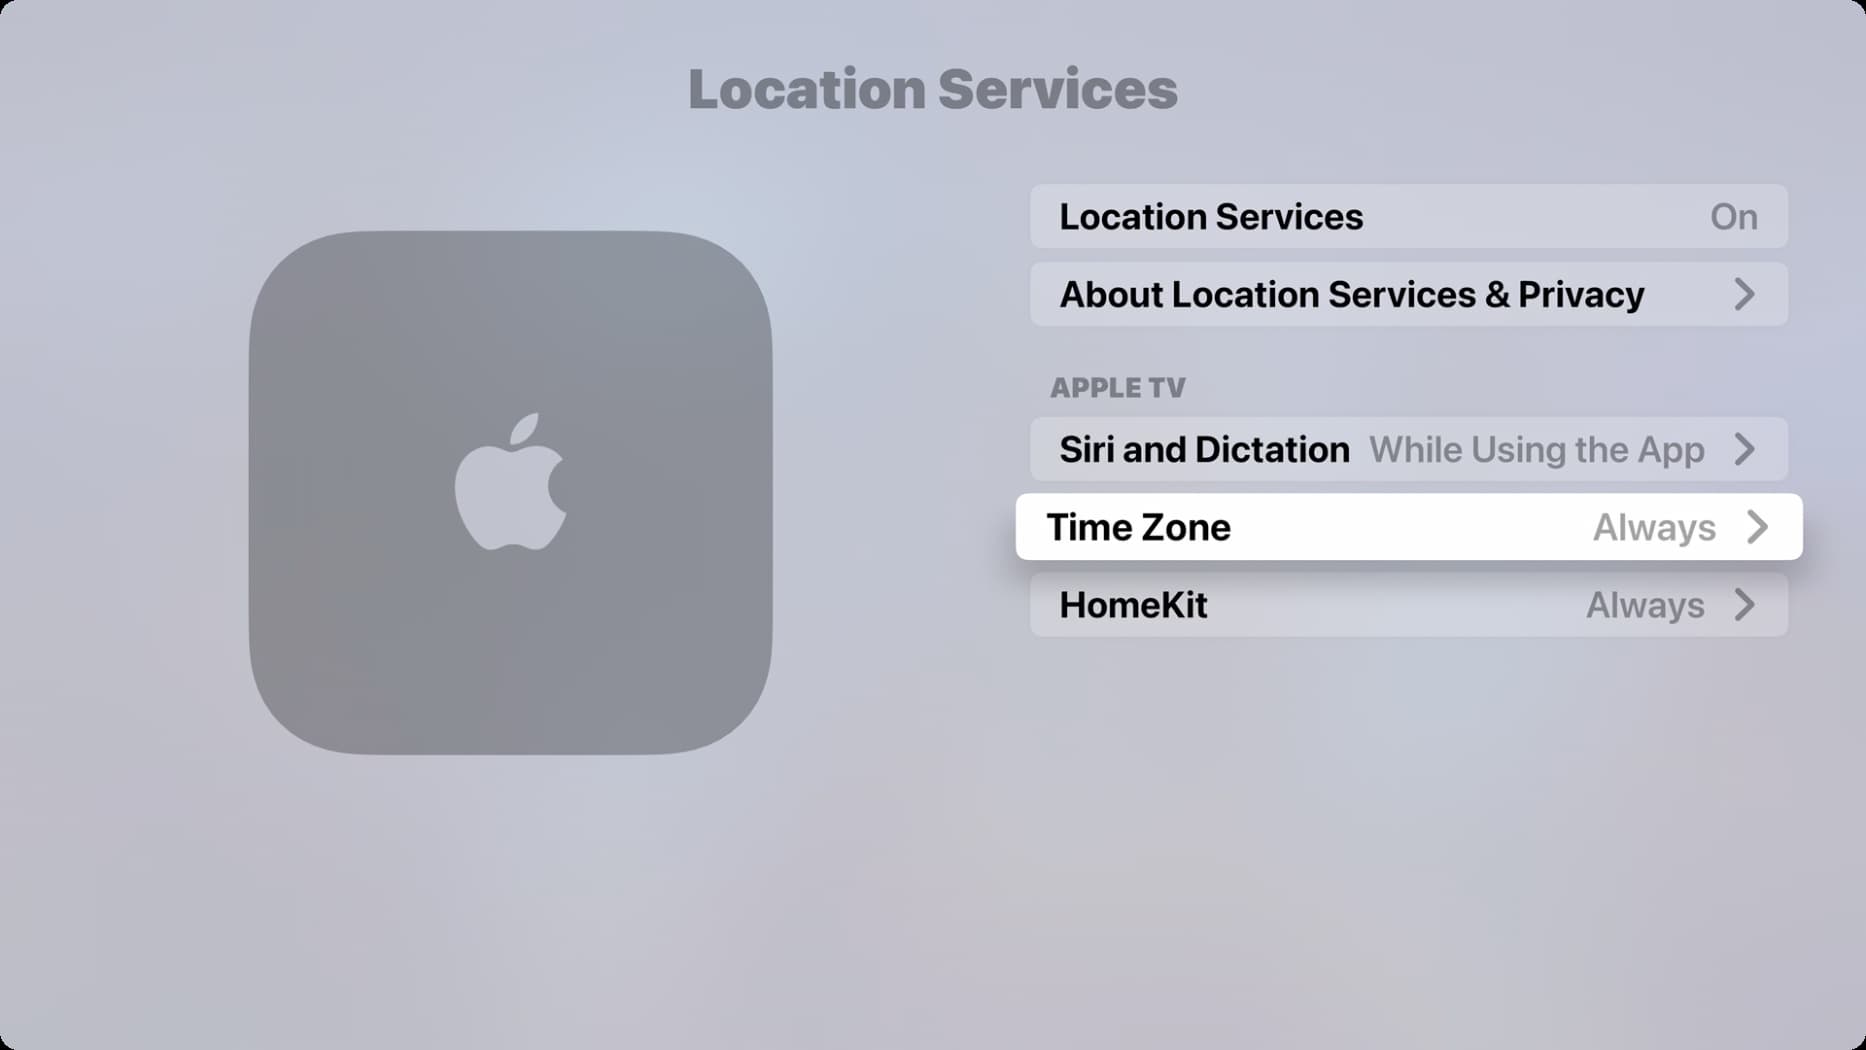 Time Zone set to always access location on Apple TV